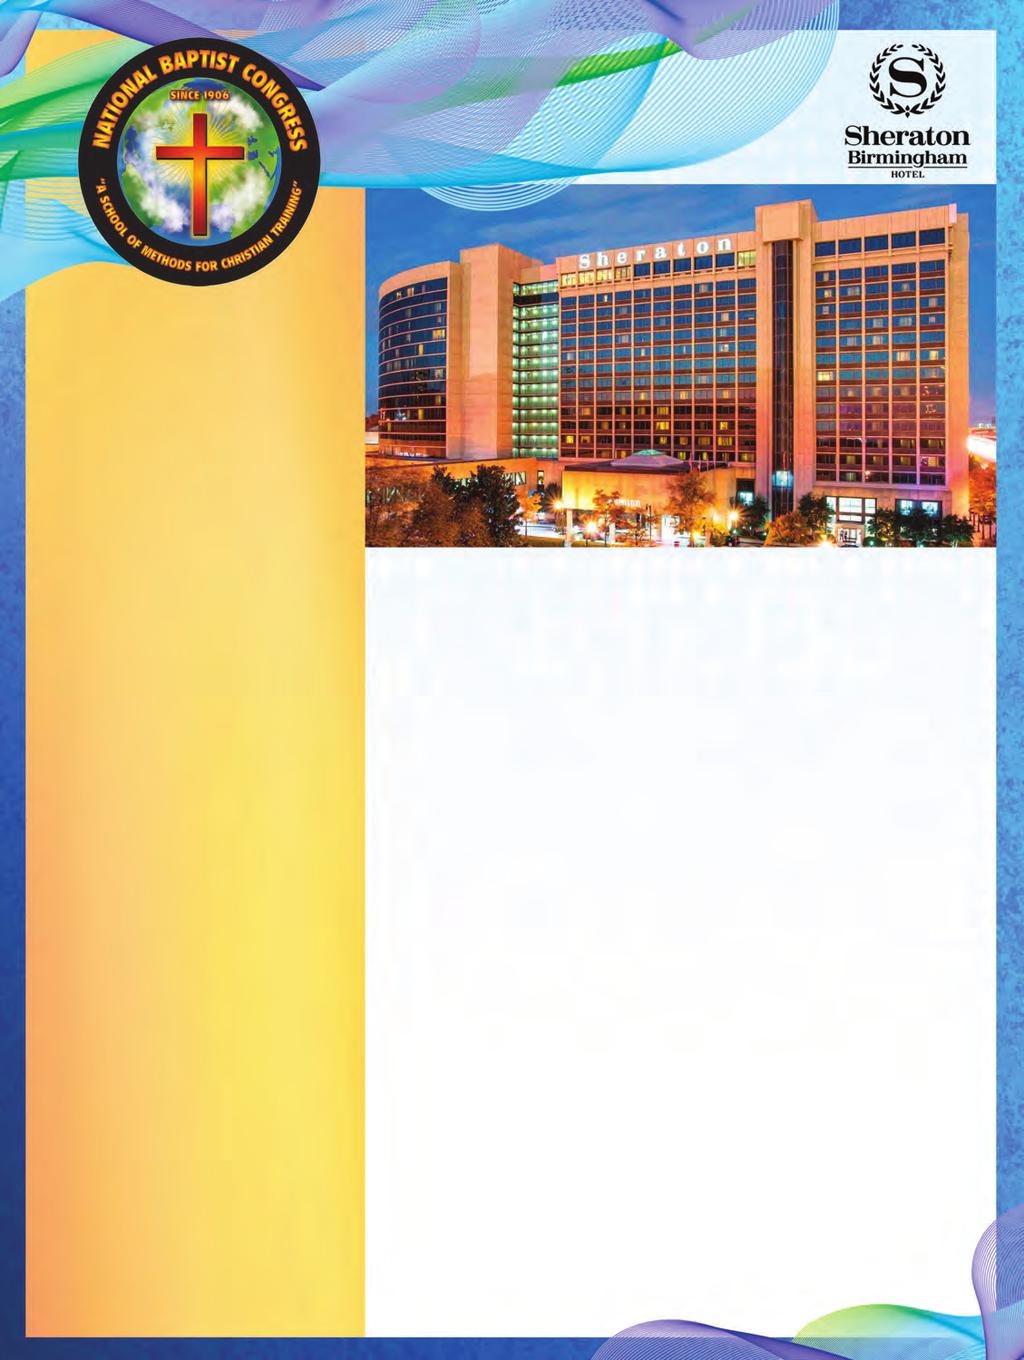 110th Annual Session JUNE 12 17, 2016 Reserve Your Room Today! Deadline is May 25, 2016. Features: See how easy it is to live like a local at the Sheraton Birmingham hotel.